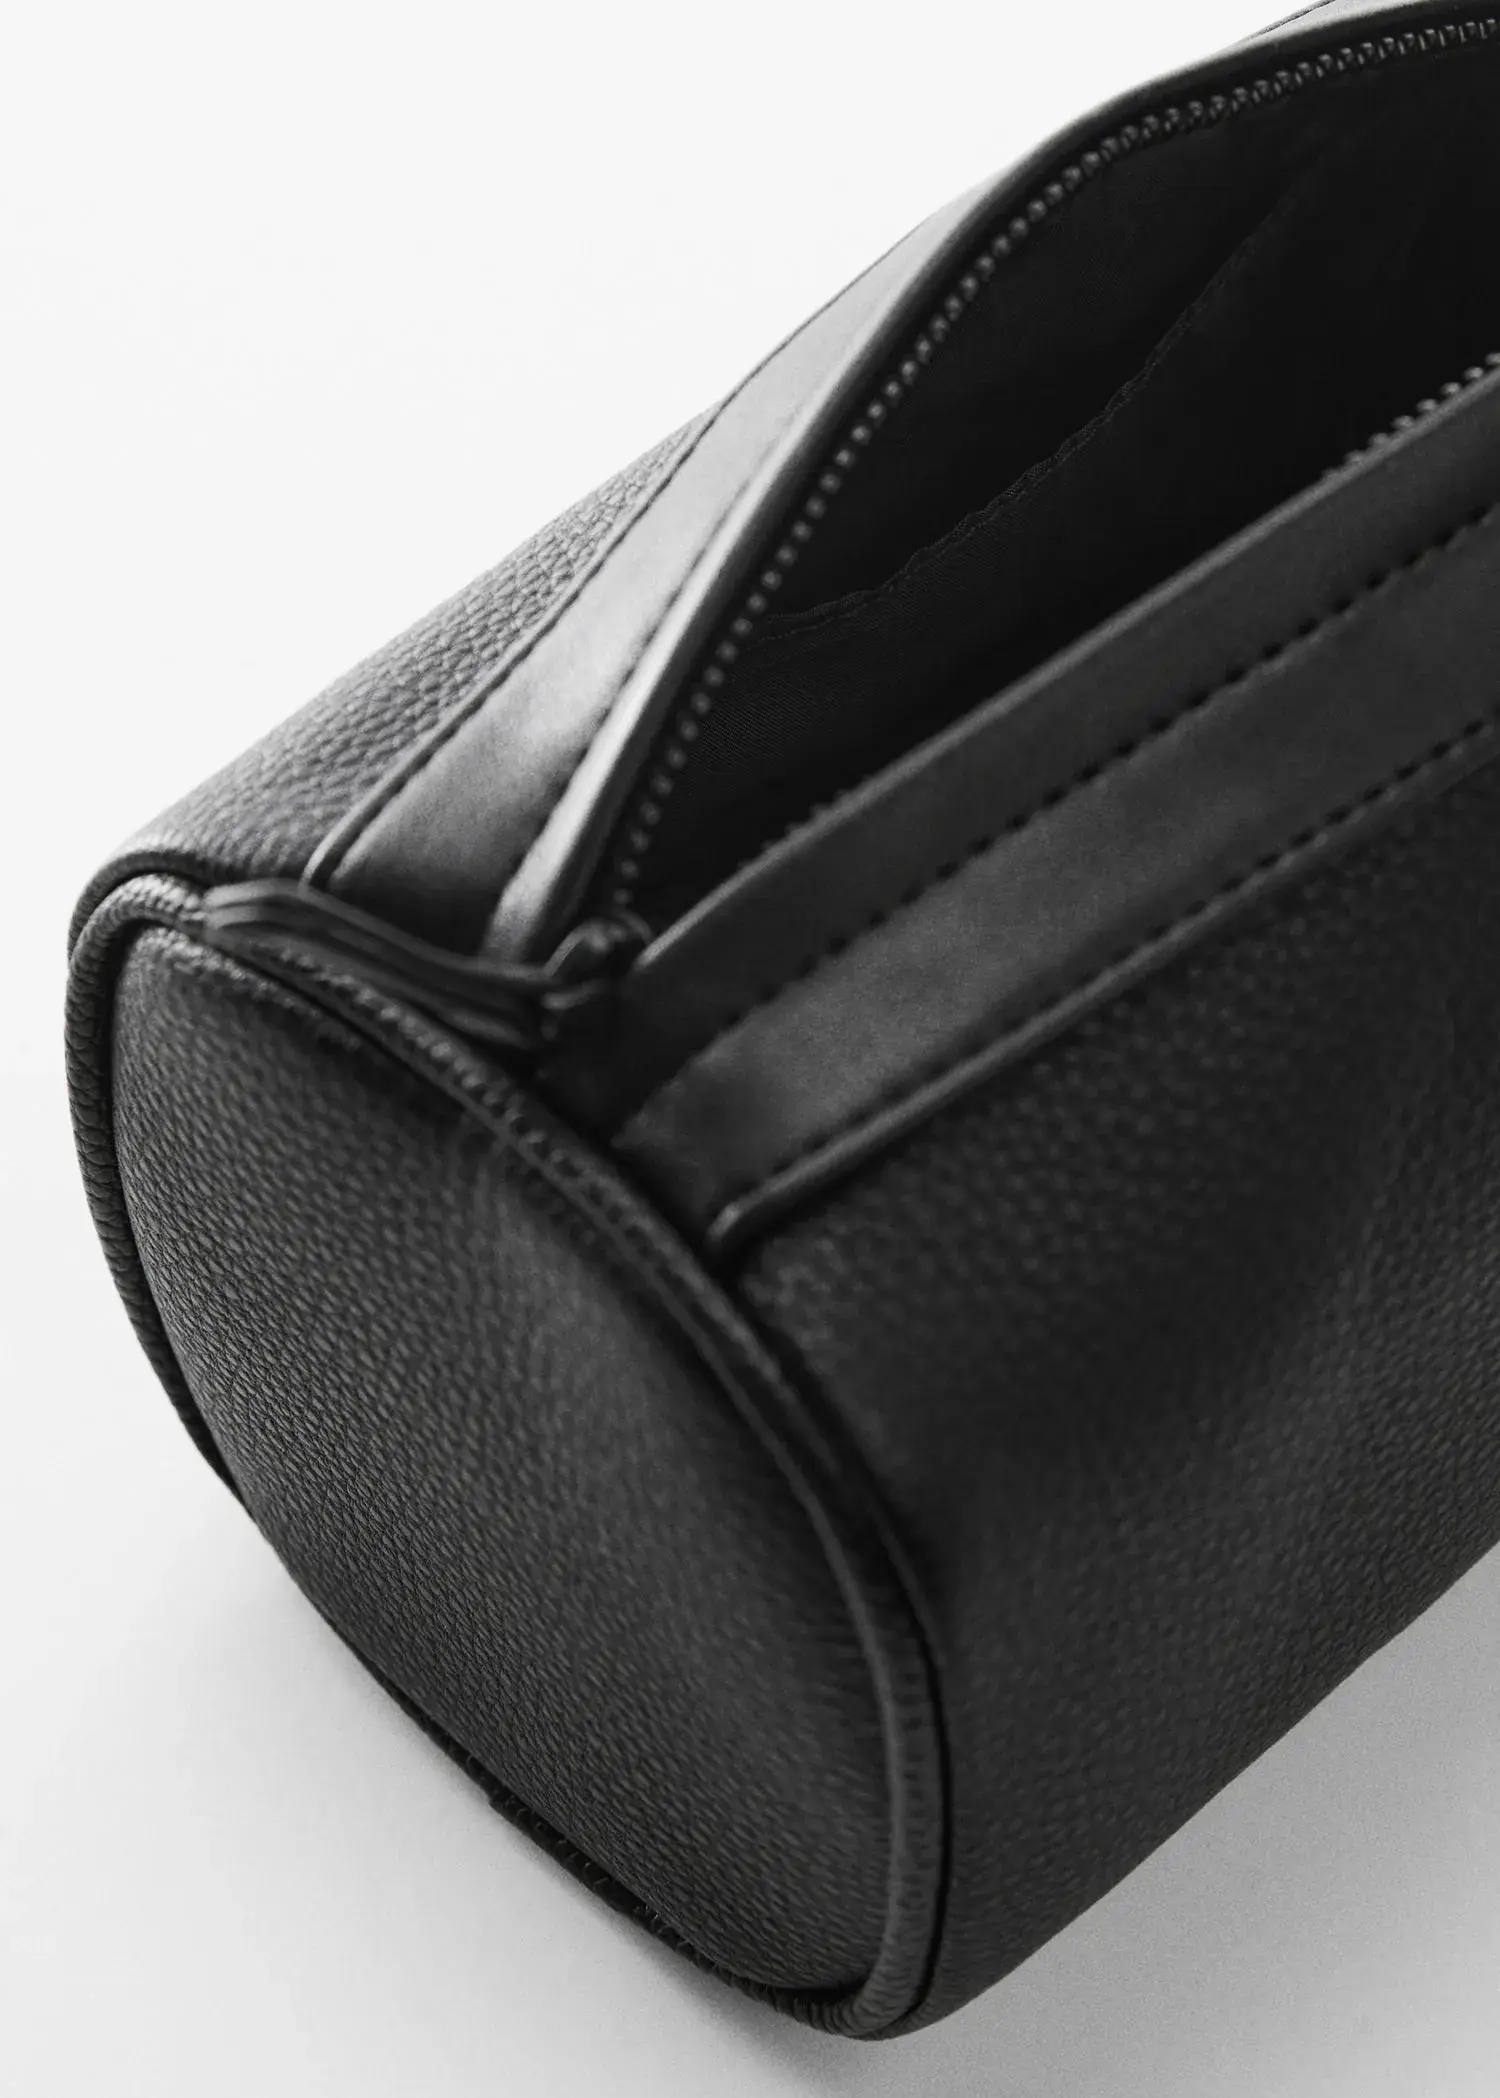 Mango Pebbled leather-effect toiletry bag. a close-up view of the inside of a black purse. 